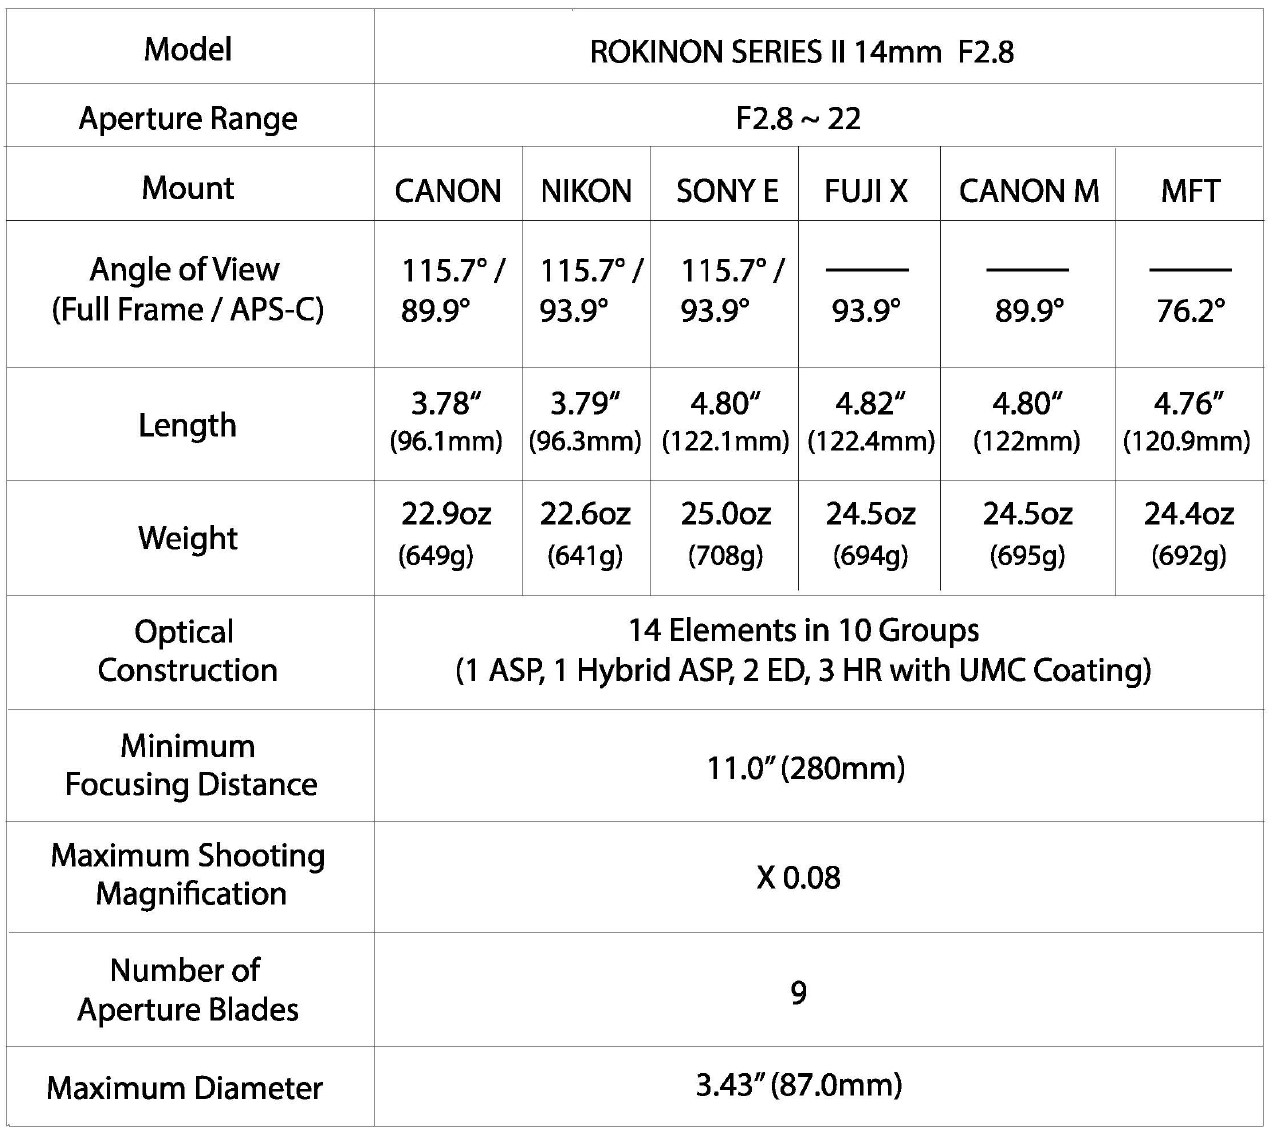 Rokinon-Series-II-14mm-Ultra-Wide-Angle-Lens-for-Canon-Instruction-Manual-2